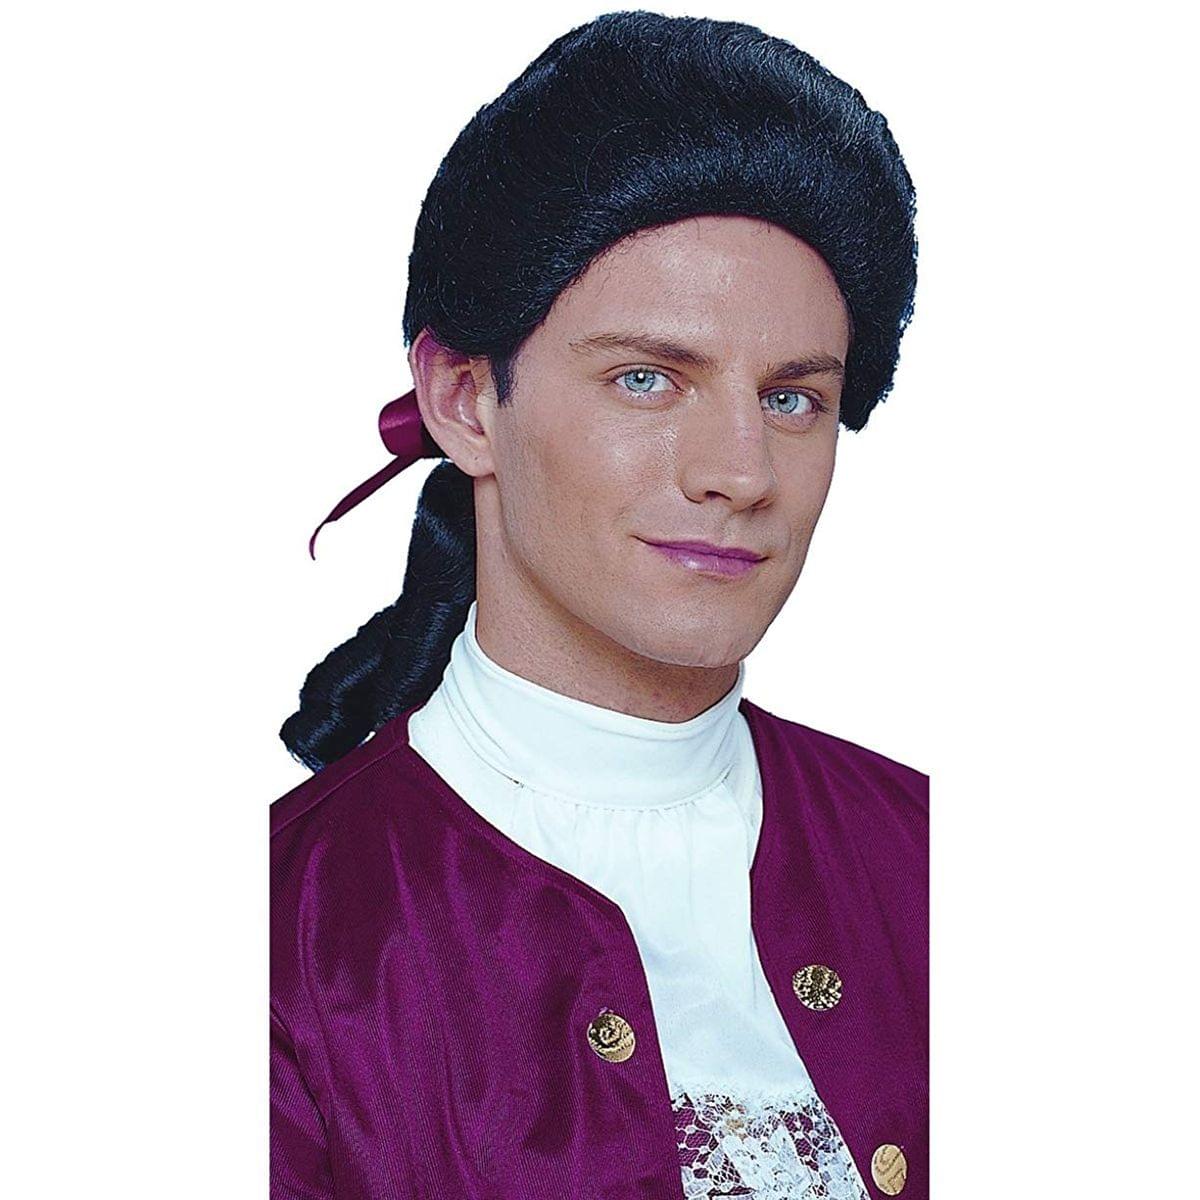 Colonial Duke Men's Costume Wig with Bow - Black